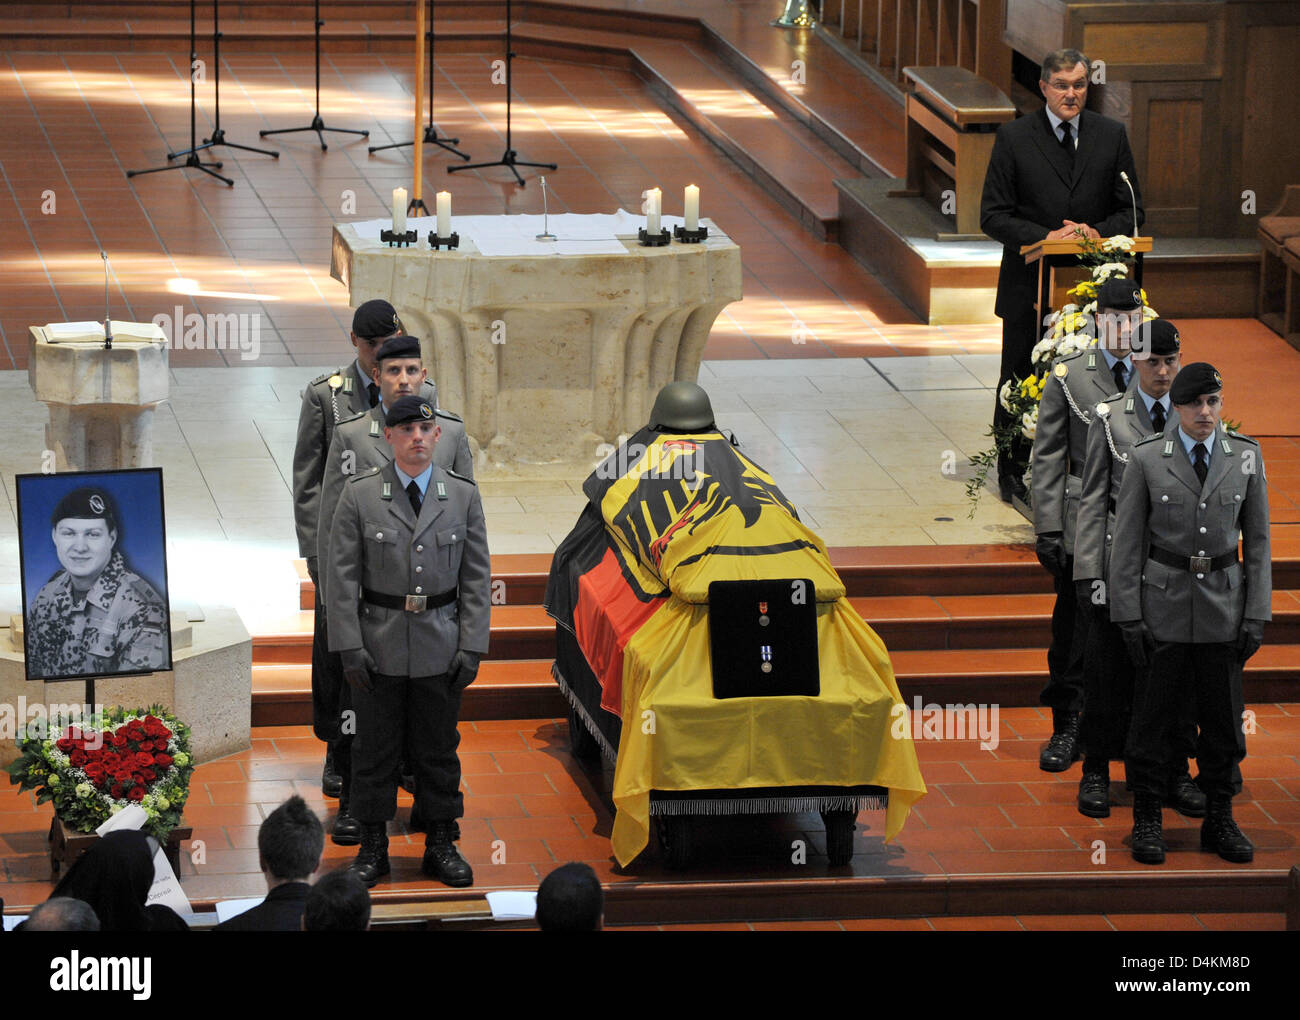 German Defence Minister Franz Josef Jung (back R) speaks at the mourning ceremony for a soldier who was killed in Afghanistan in Bad Saulgau, Germany, 07 May 2009. Some 600 people attended the ceremony for the 21-year-old who was killed in a gunfight in Kundus on 29 April 2009. Photo: PATRICK SEEGER Stock Photo